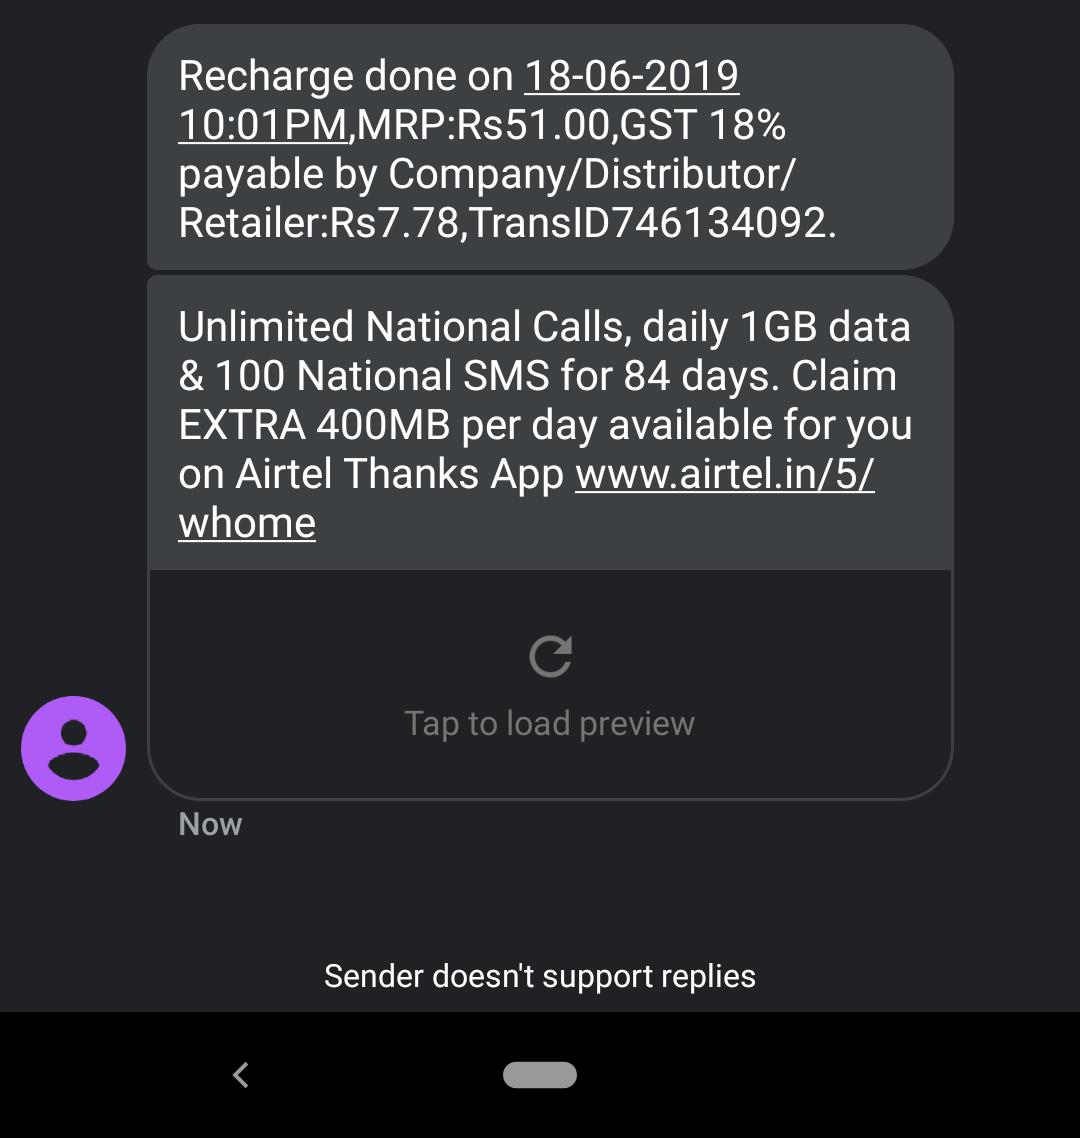 Airtel Loot - Get 4G Daily 1 GB Data for 84 Days in Just Rs.51